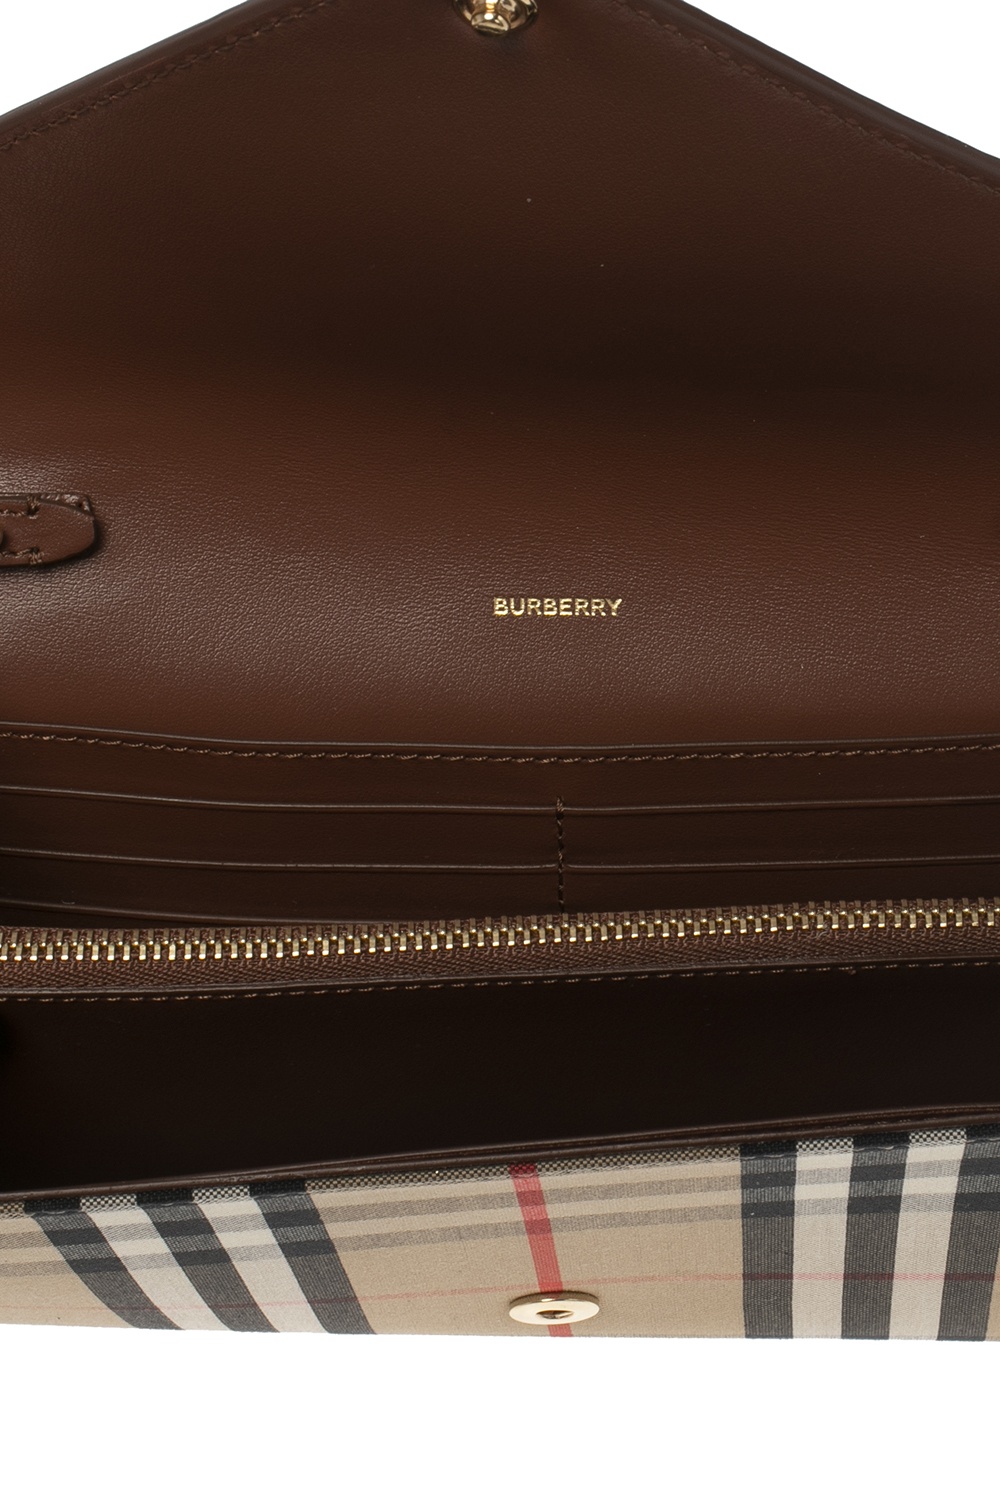 Burberry Wallet with shoulder strap